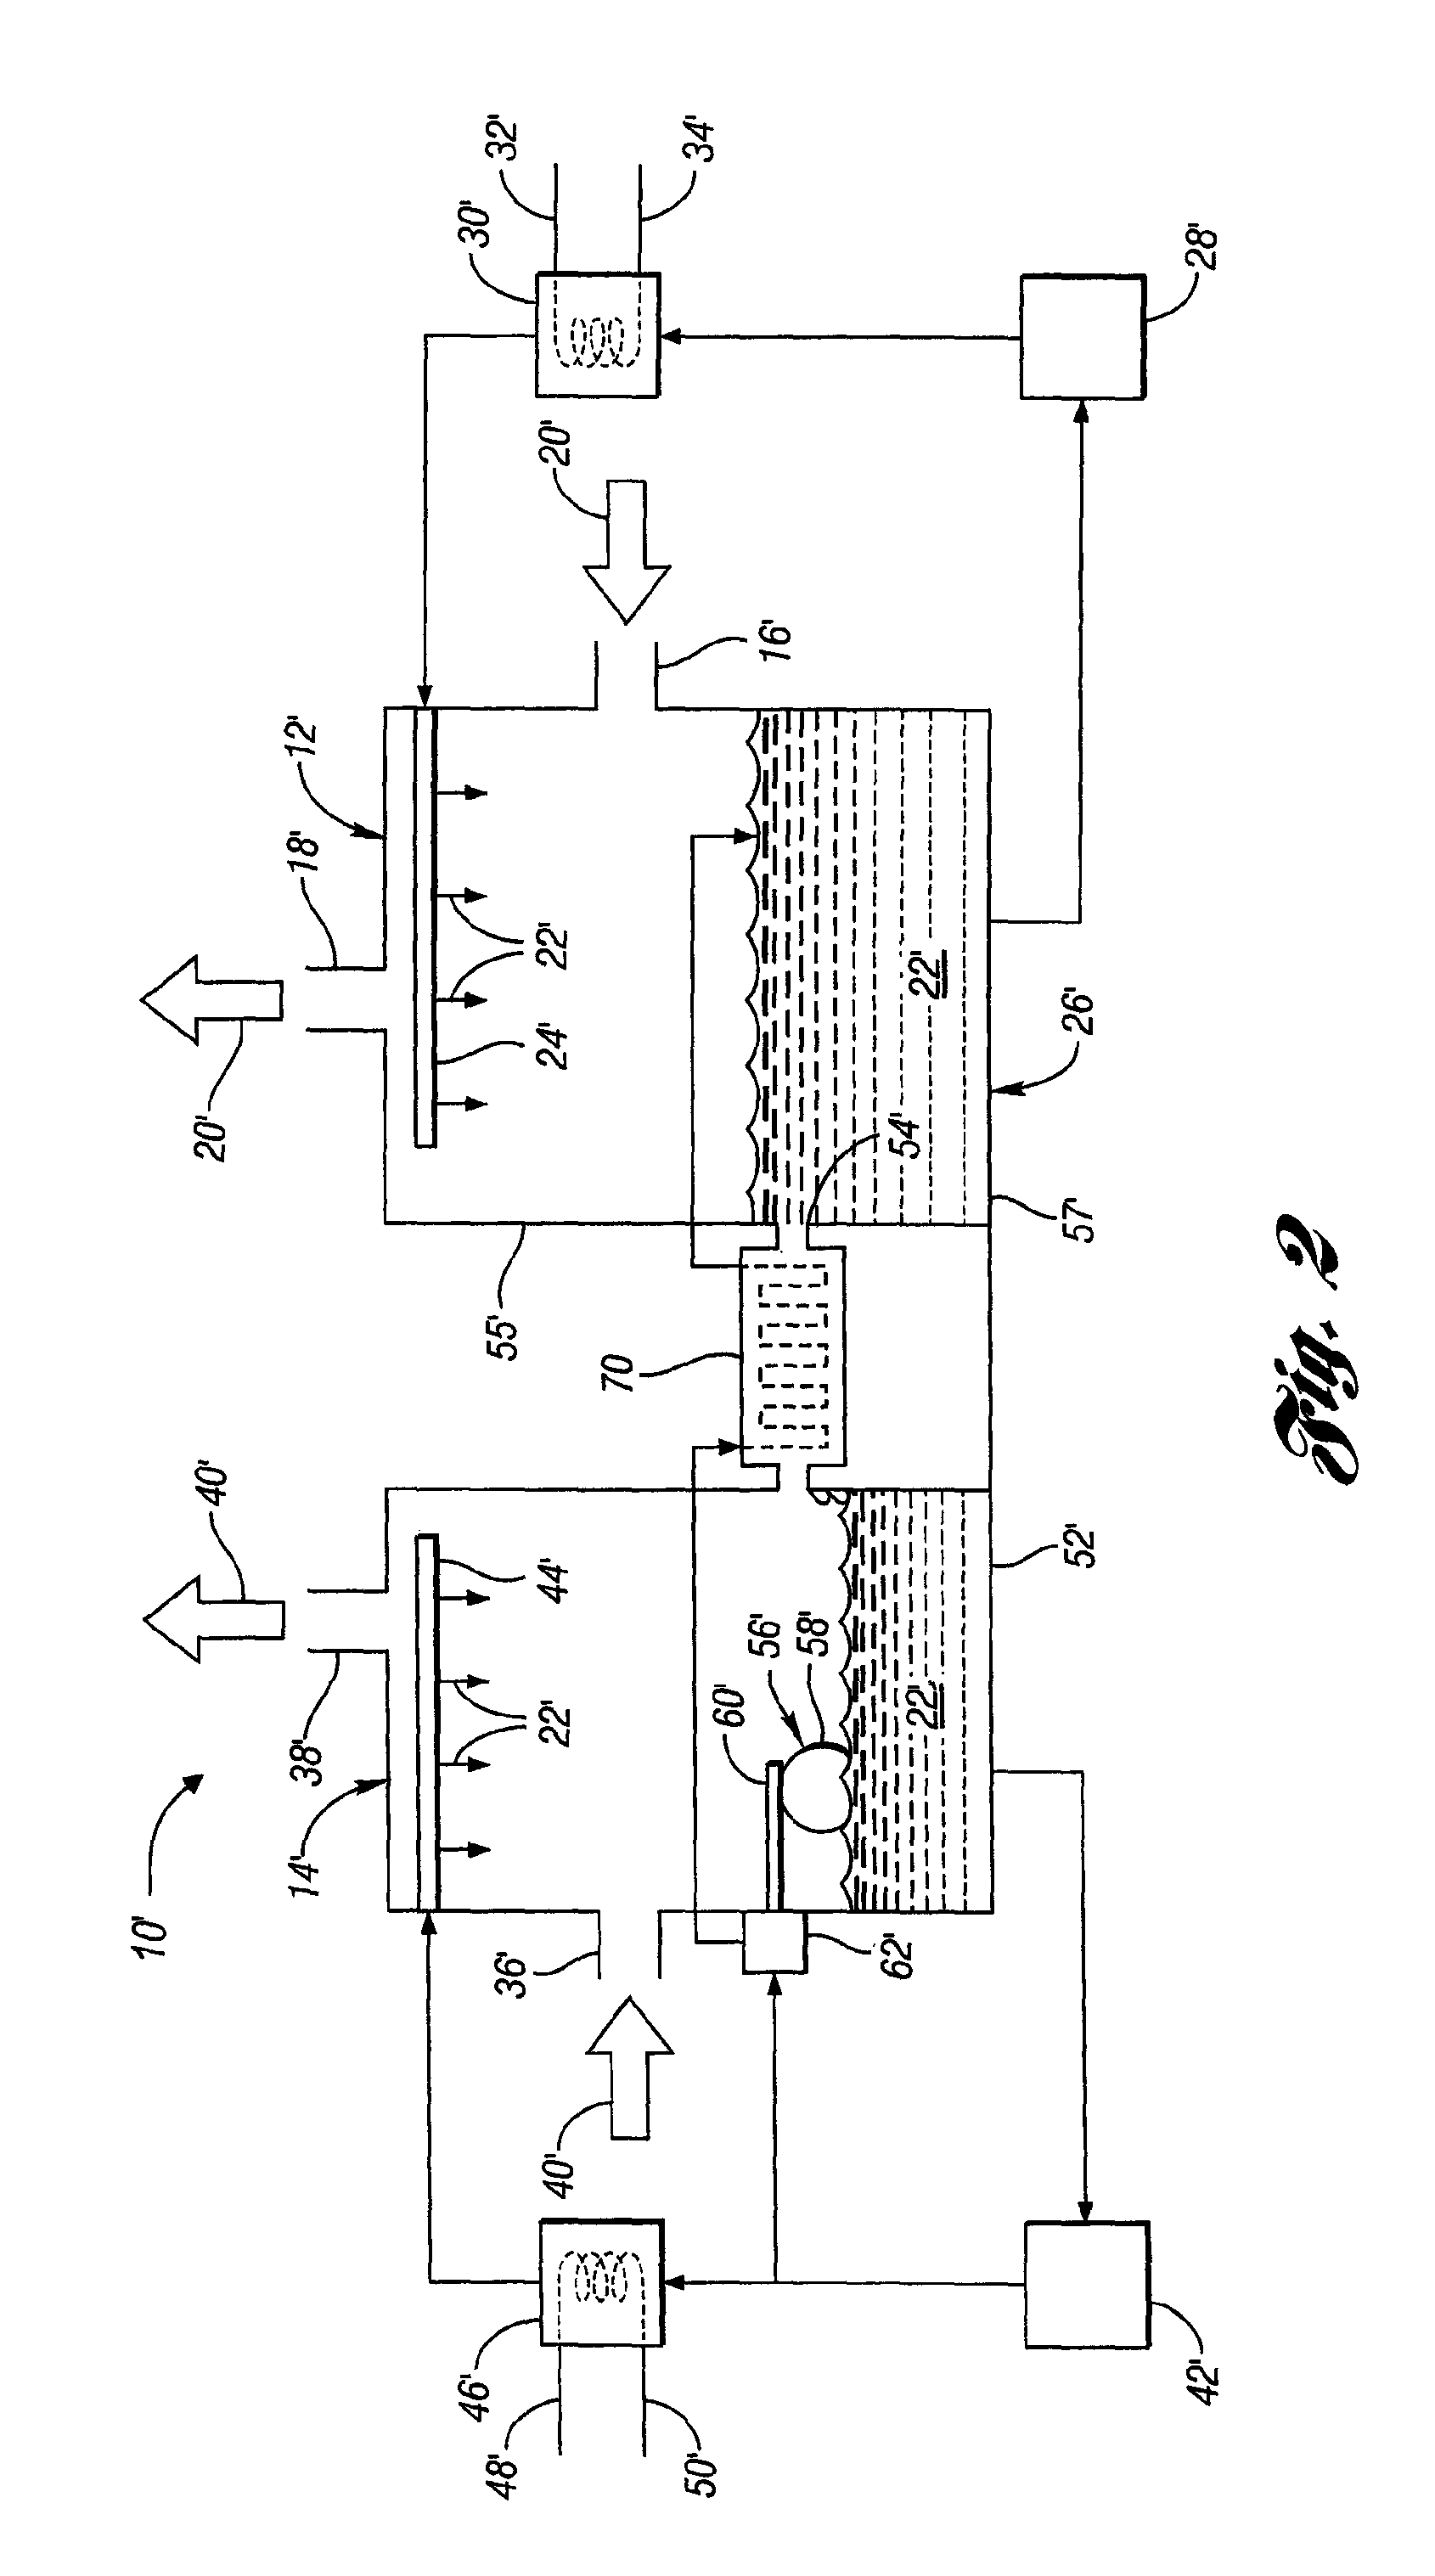 System and method for managing water content in a fluid